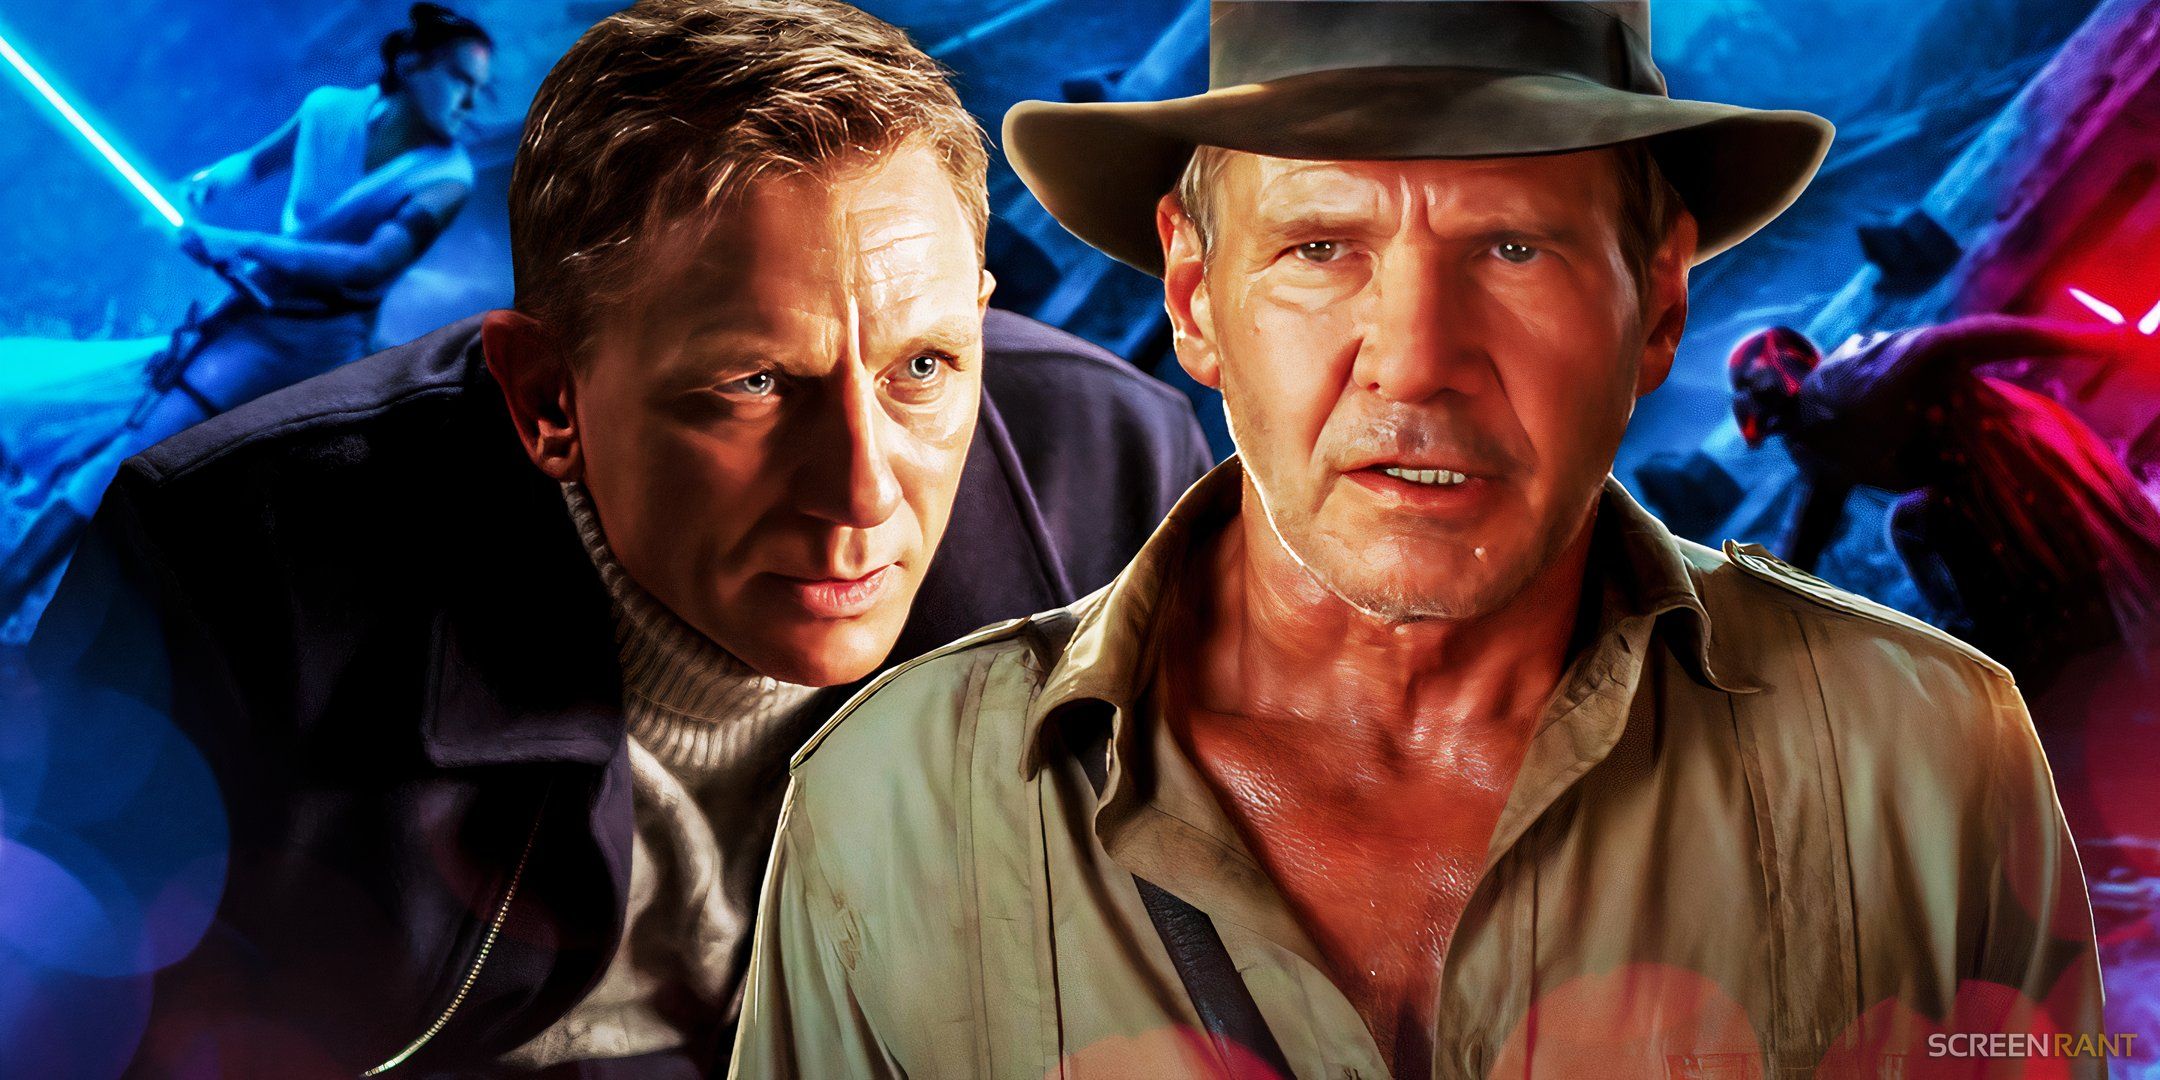 Daniel Craig as James Bond from Spectre and HarrisonFordas IndianaJones from Indiana Jones and the Kingdom of the Crystal Skull